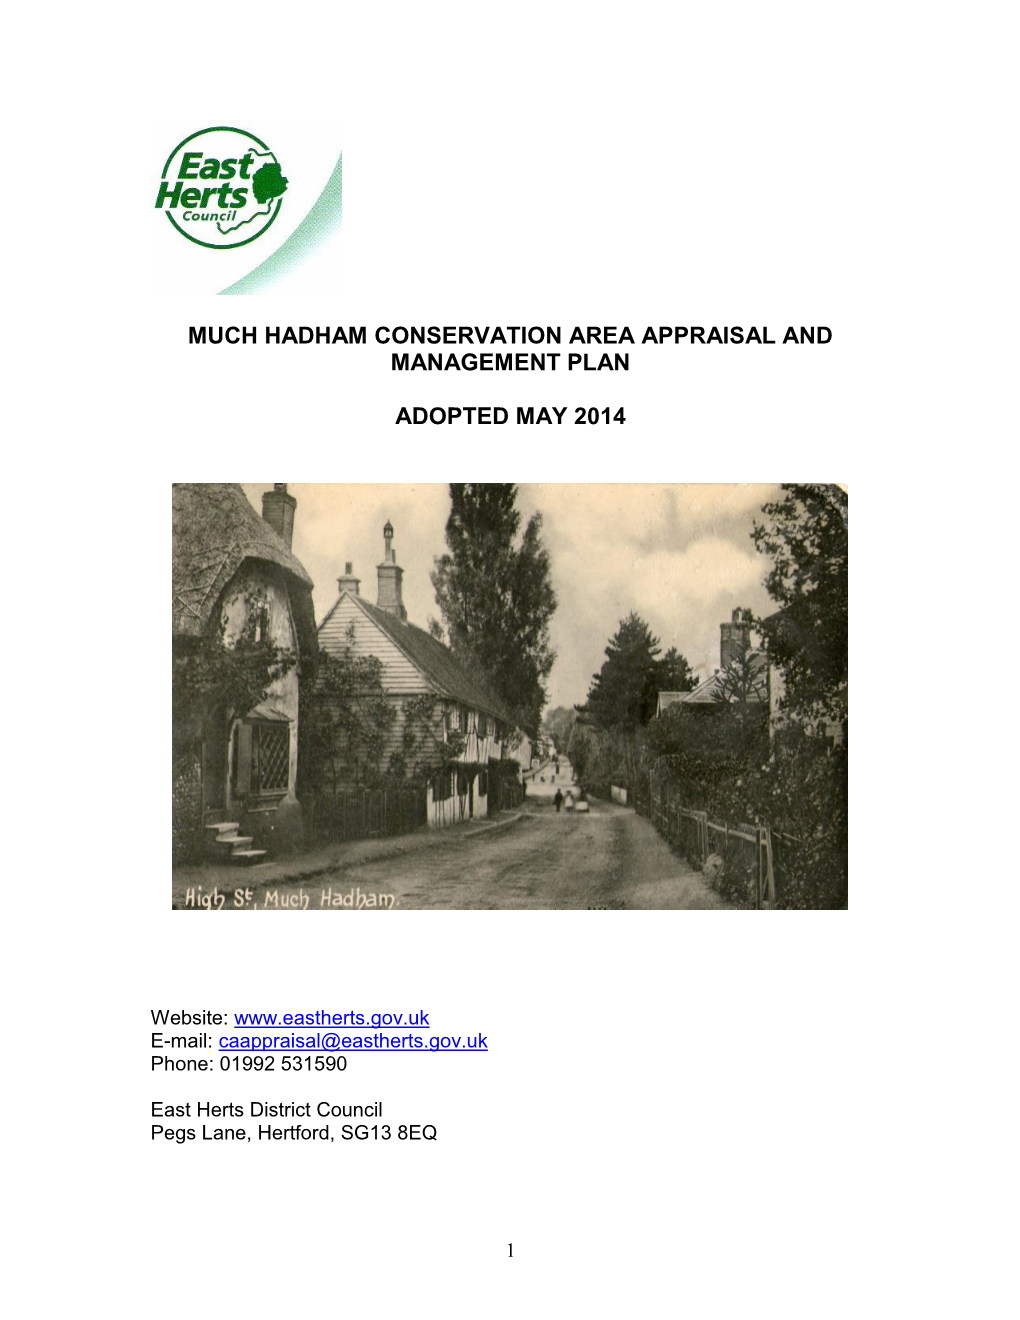 Much Hadham Conservation Area Appraisal and Management Plan